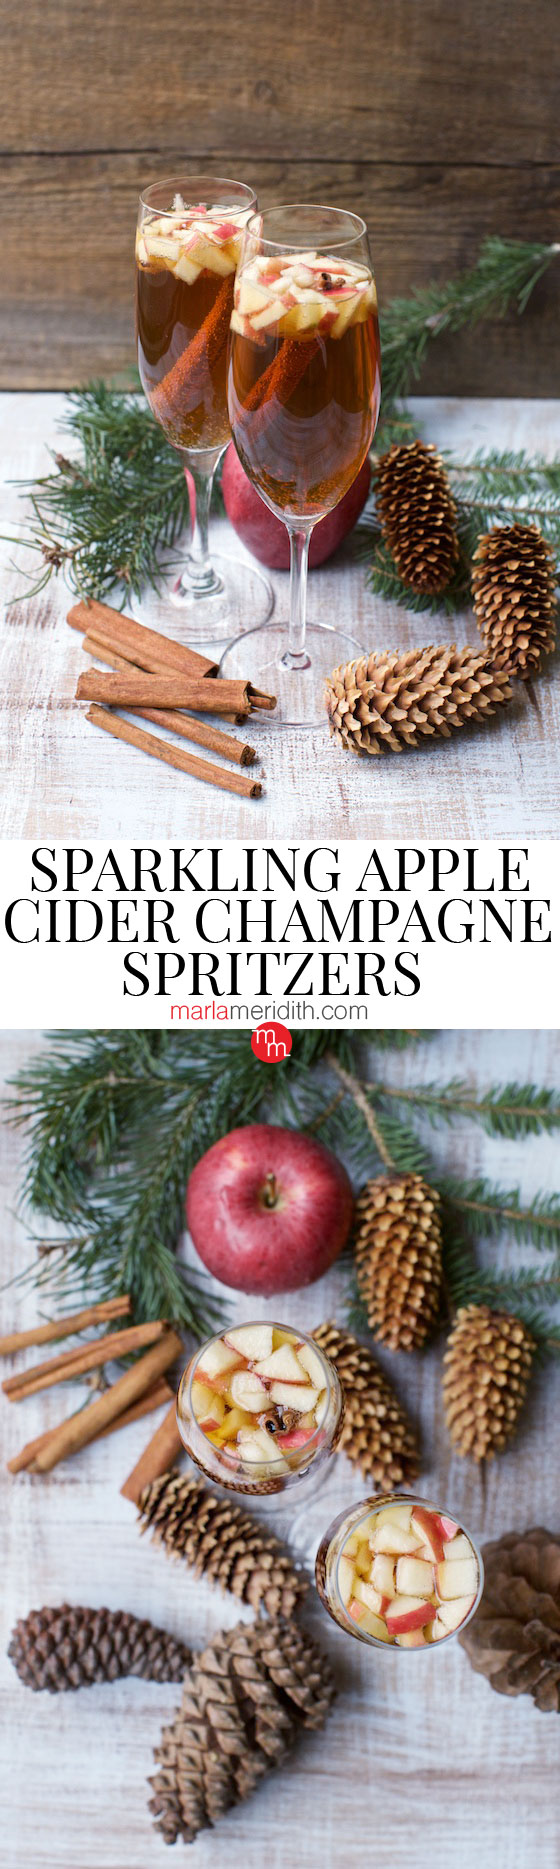 Sparkling Apple Cider Champagne Spritzers recipe. The only cocktail you need for the holidays! MarlaMeridith.com #champagne #cocktail #recipe